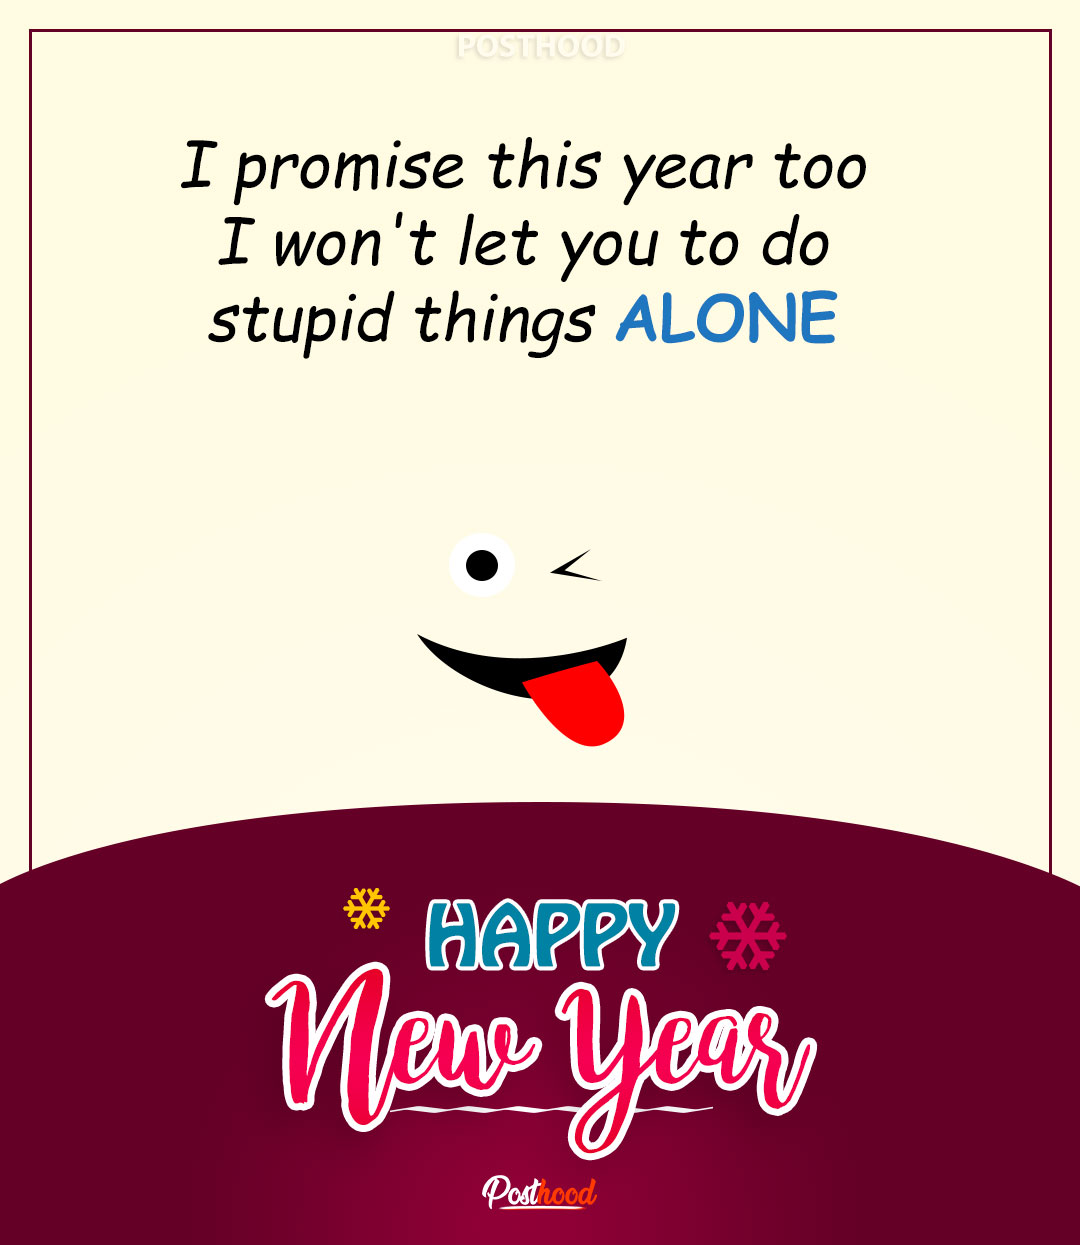 Find super funny New Year wishes for friends and family. Remind them you are there in lots of funny and crazy things heading in next year. 